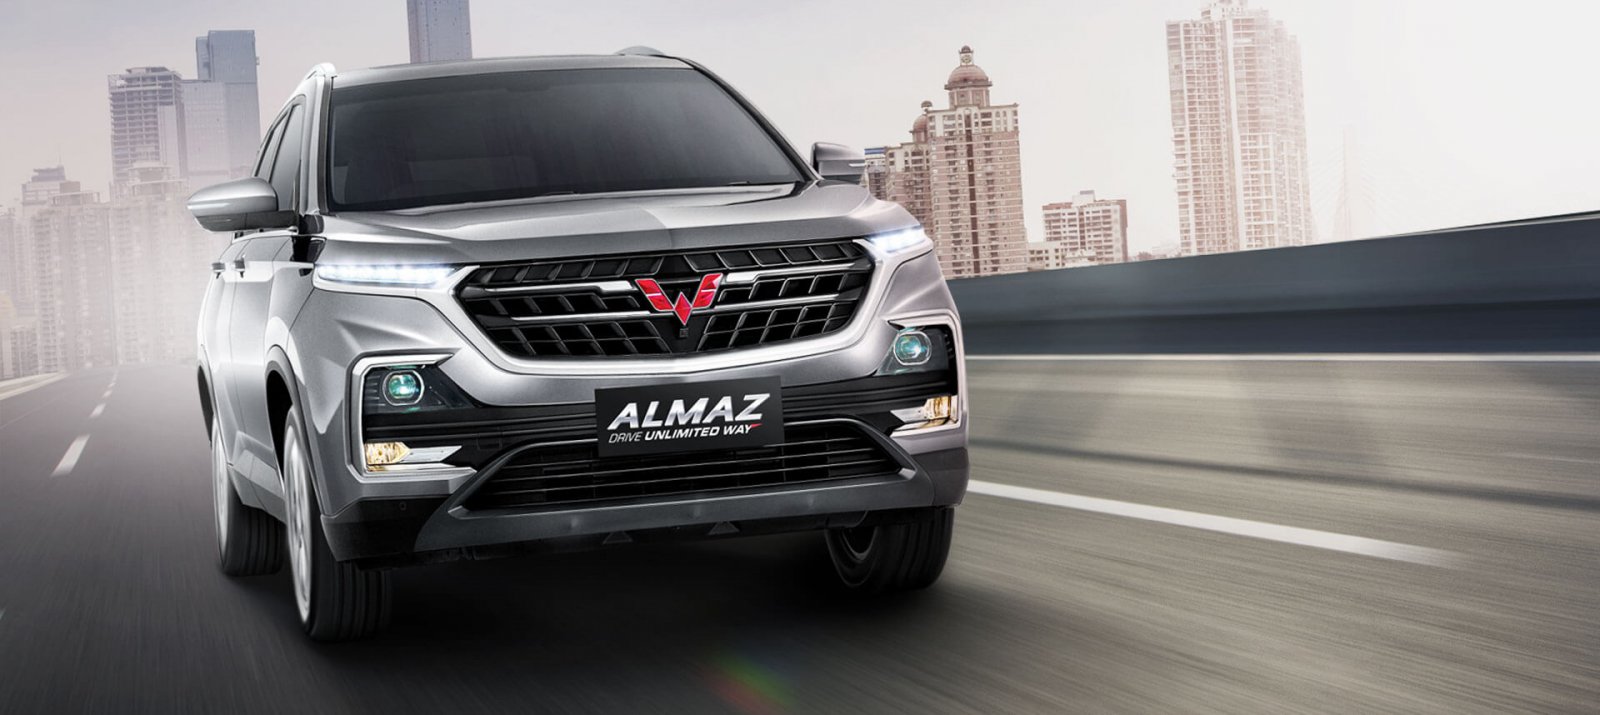 Image Wuling Almaz: Drive Unlimited Way with a Powerful 1.5 Turbocharged Engine